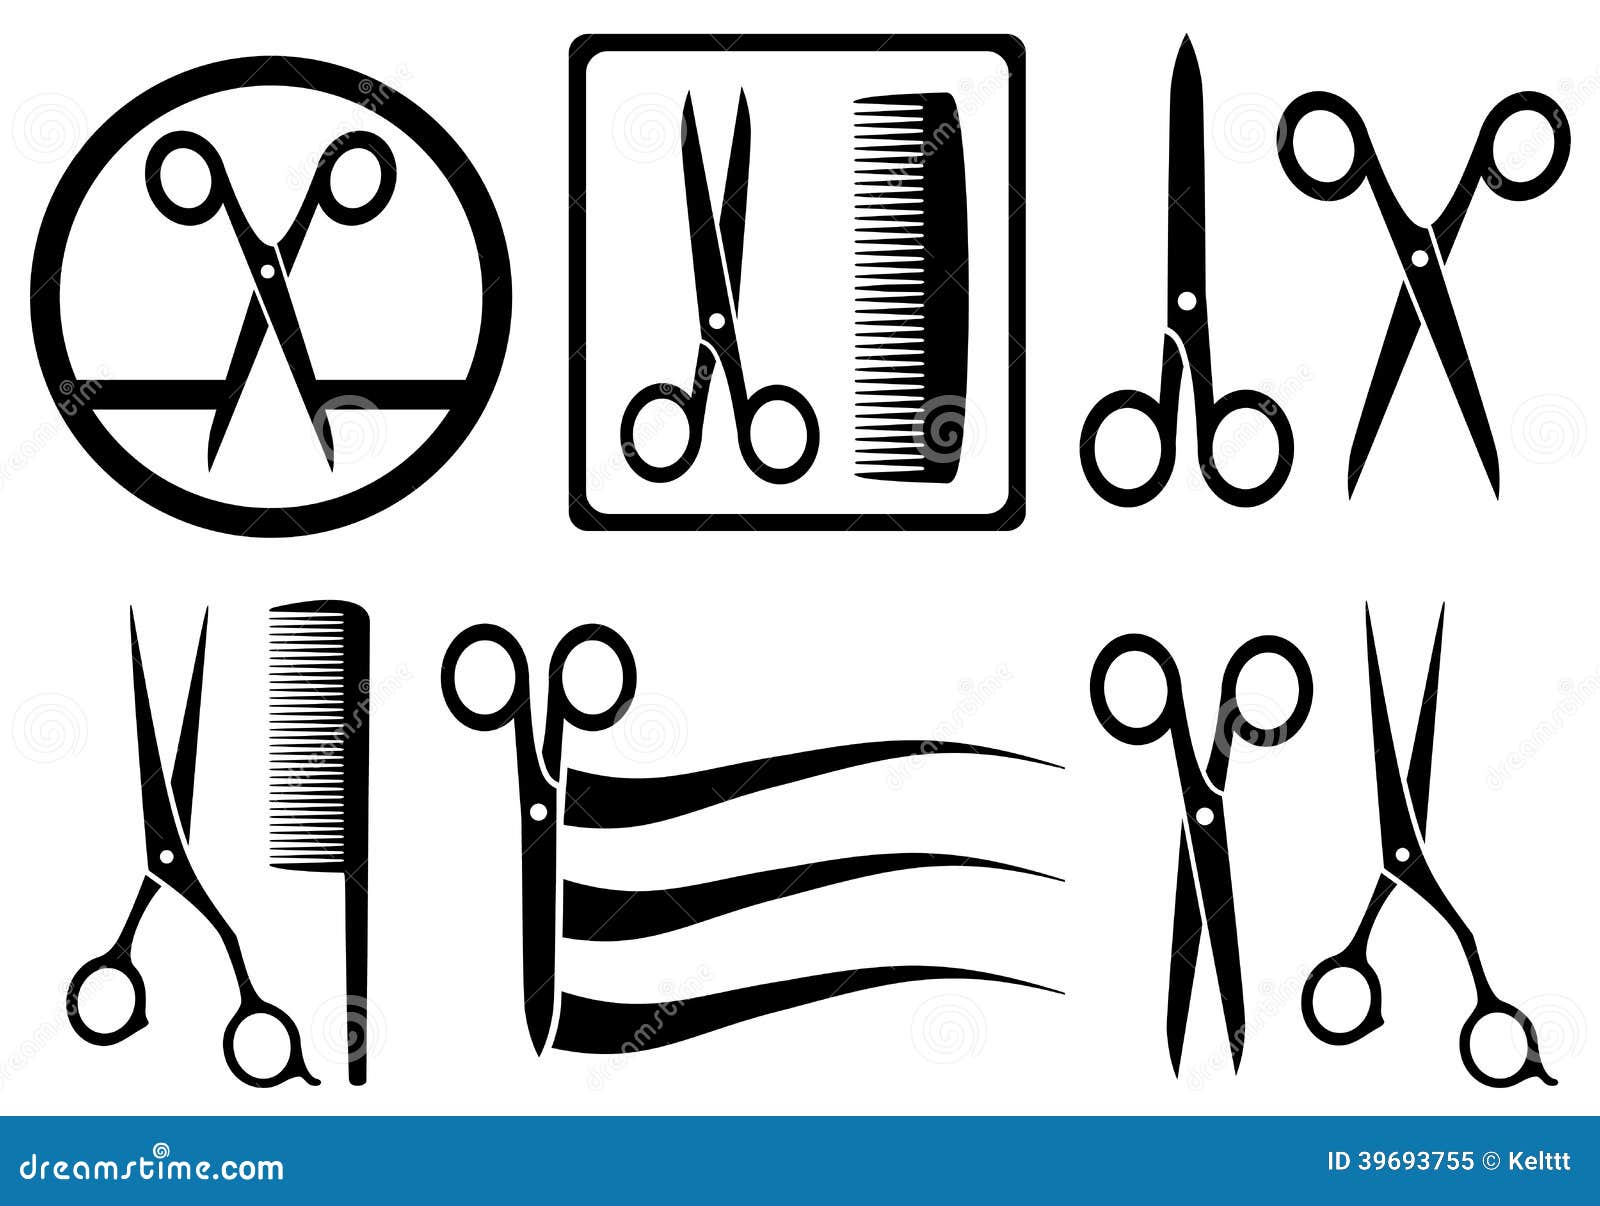 scissors icons with comb for hair salon